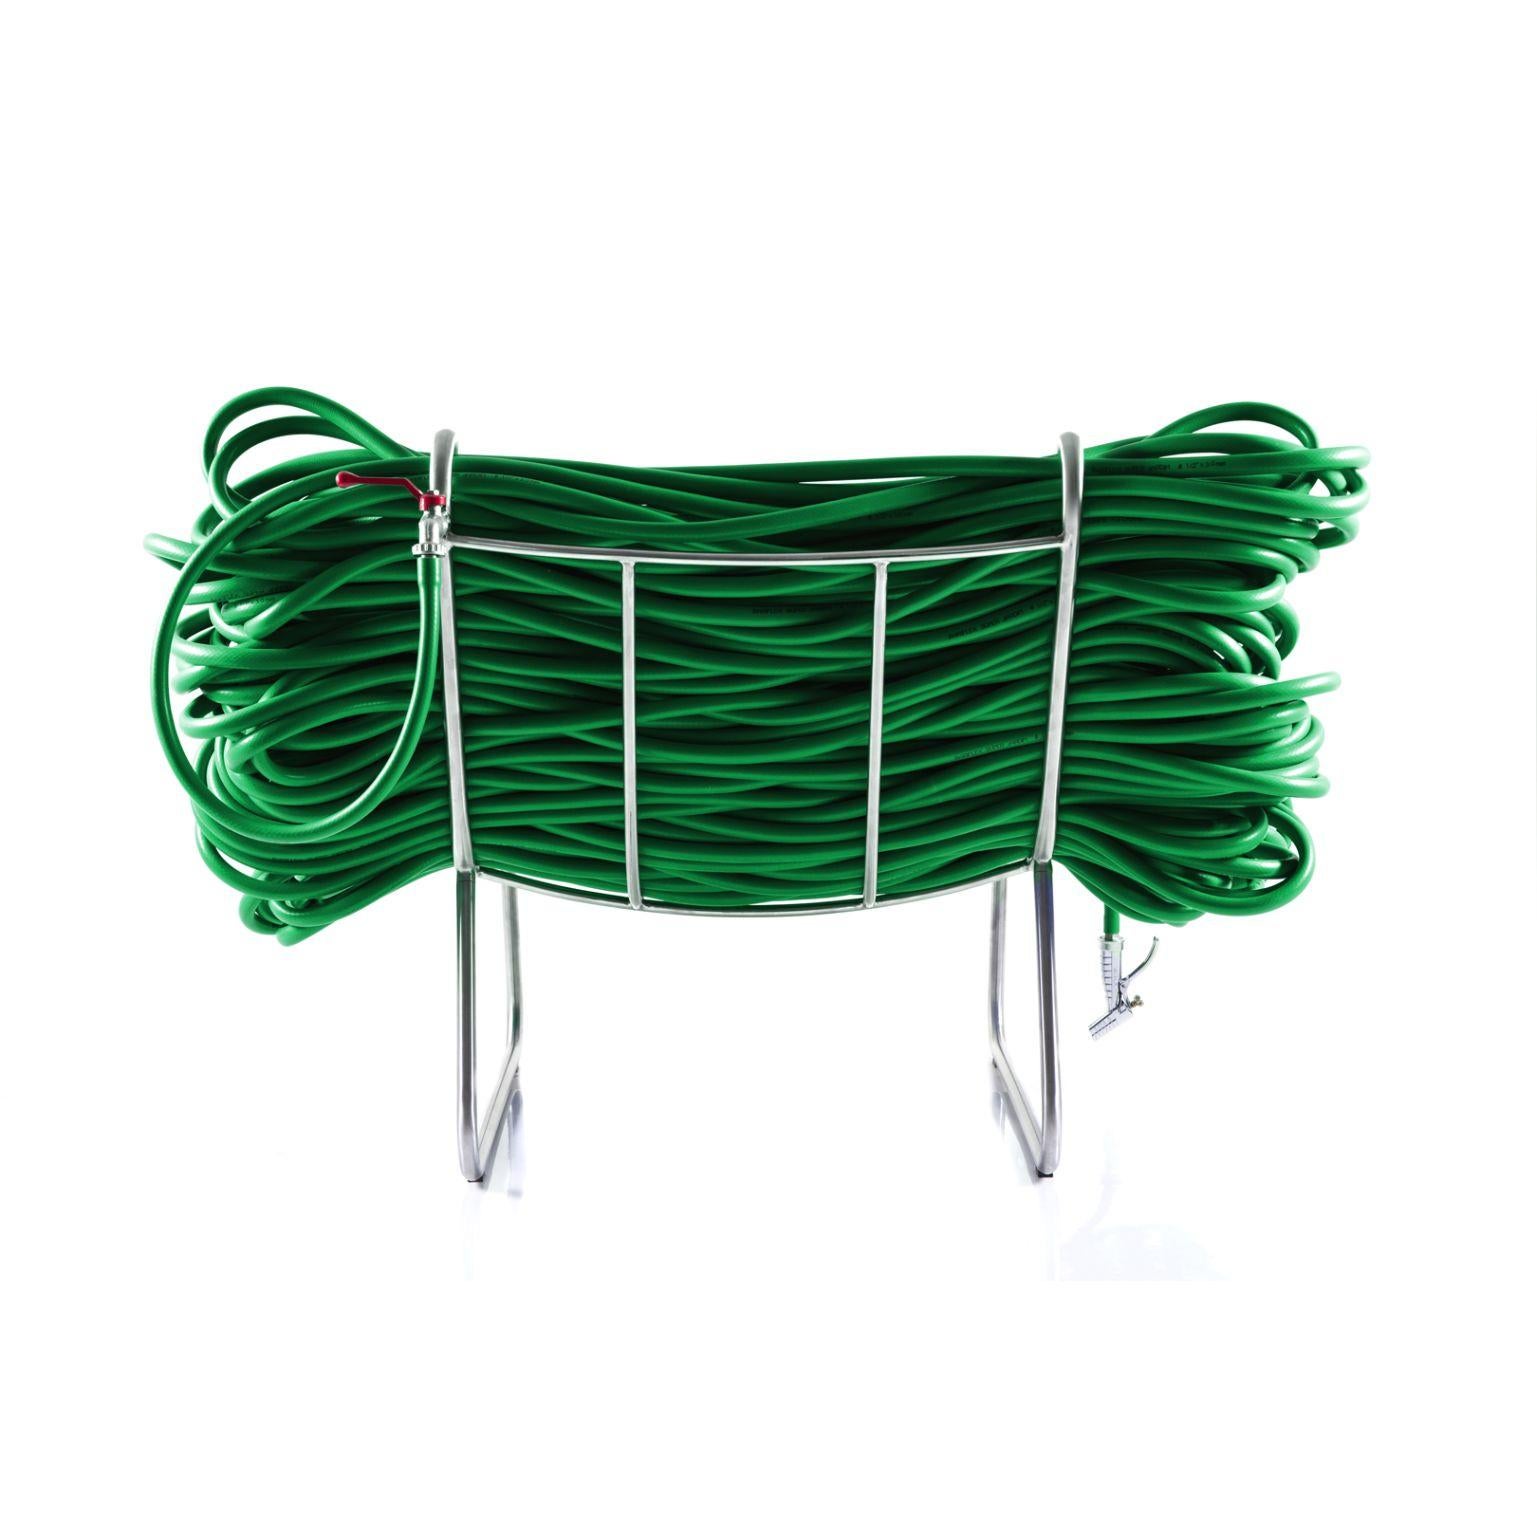 Super Jardim - Green armchair by Cultivado Em Casa
Dimensions: 105 x 80 x 73 cm
Materials: Stainless steel, PVC hose, nozzle and faucet

Also available: blue, red, black, yellow

Using a 200-meter continuous garden hose, with a faucet at one